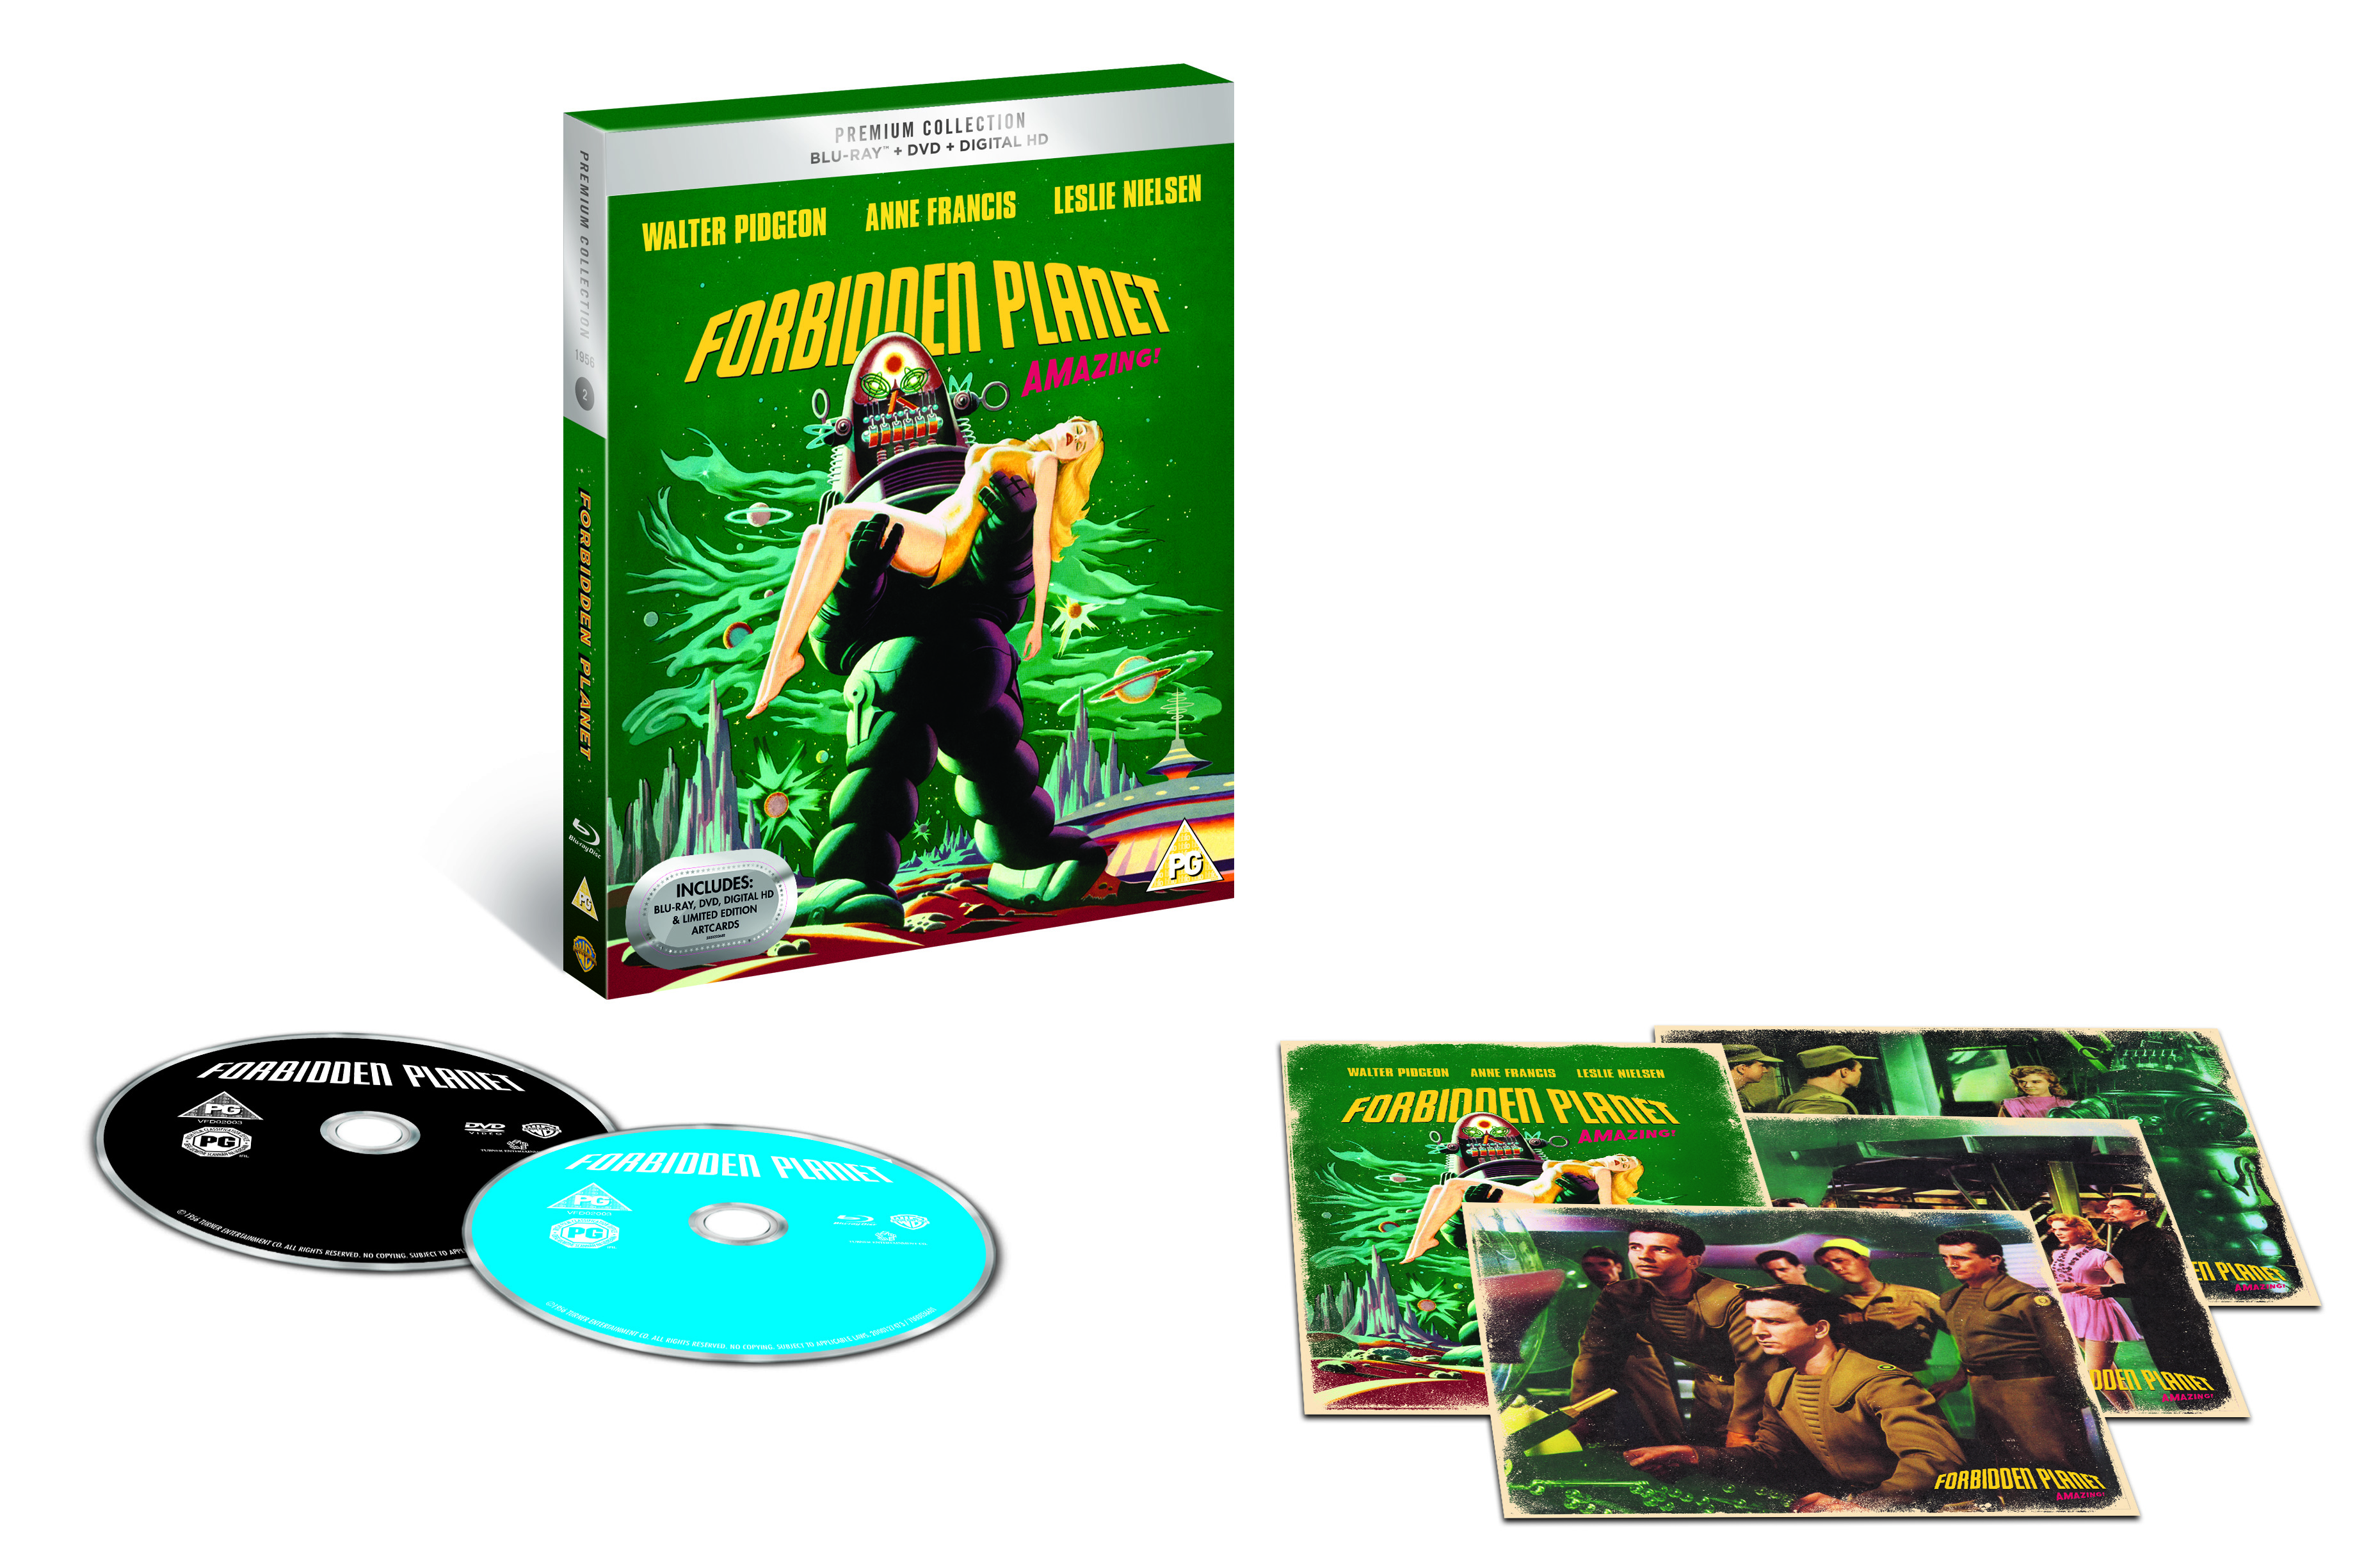 Forbidden Planet (1956) - Turner Classic Movies